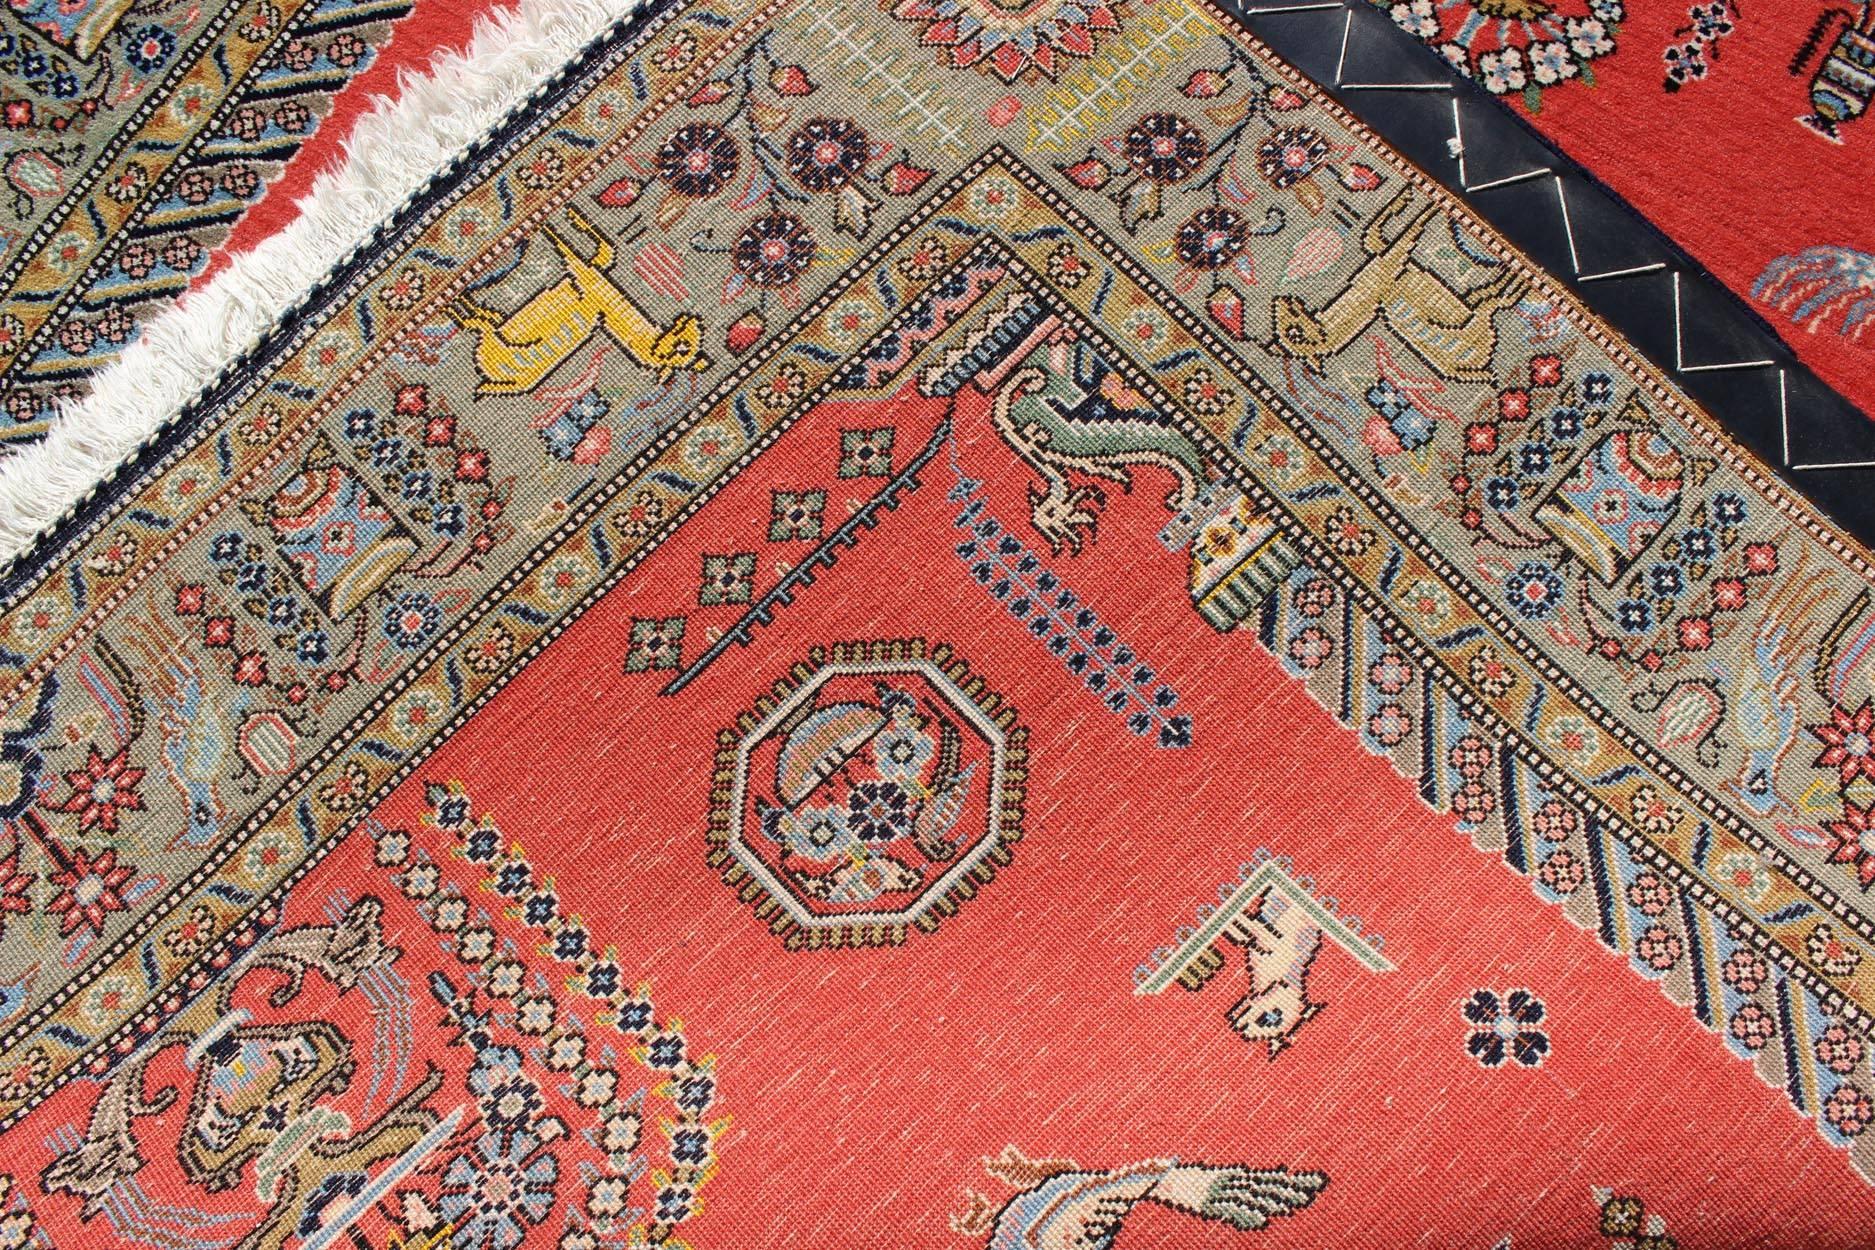 Late 20th Century Vintage Fine Persian Qum Prayer Rug With Soft Red Field in Mihrab Design For Sale